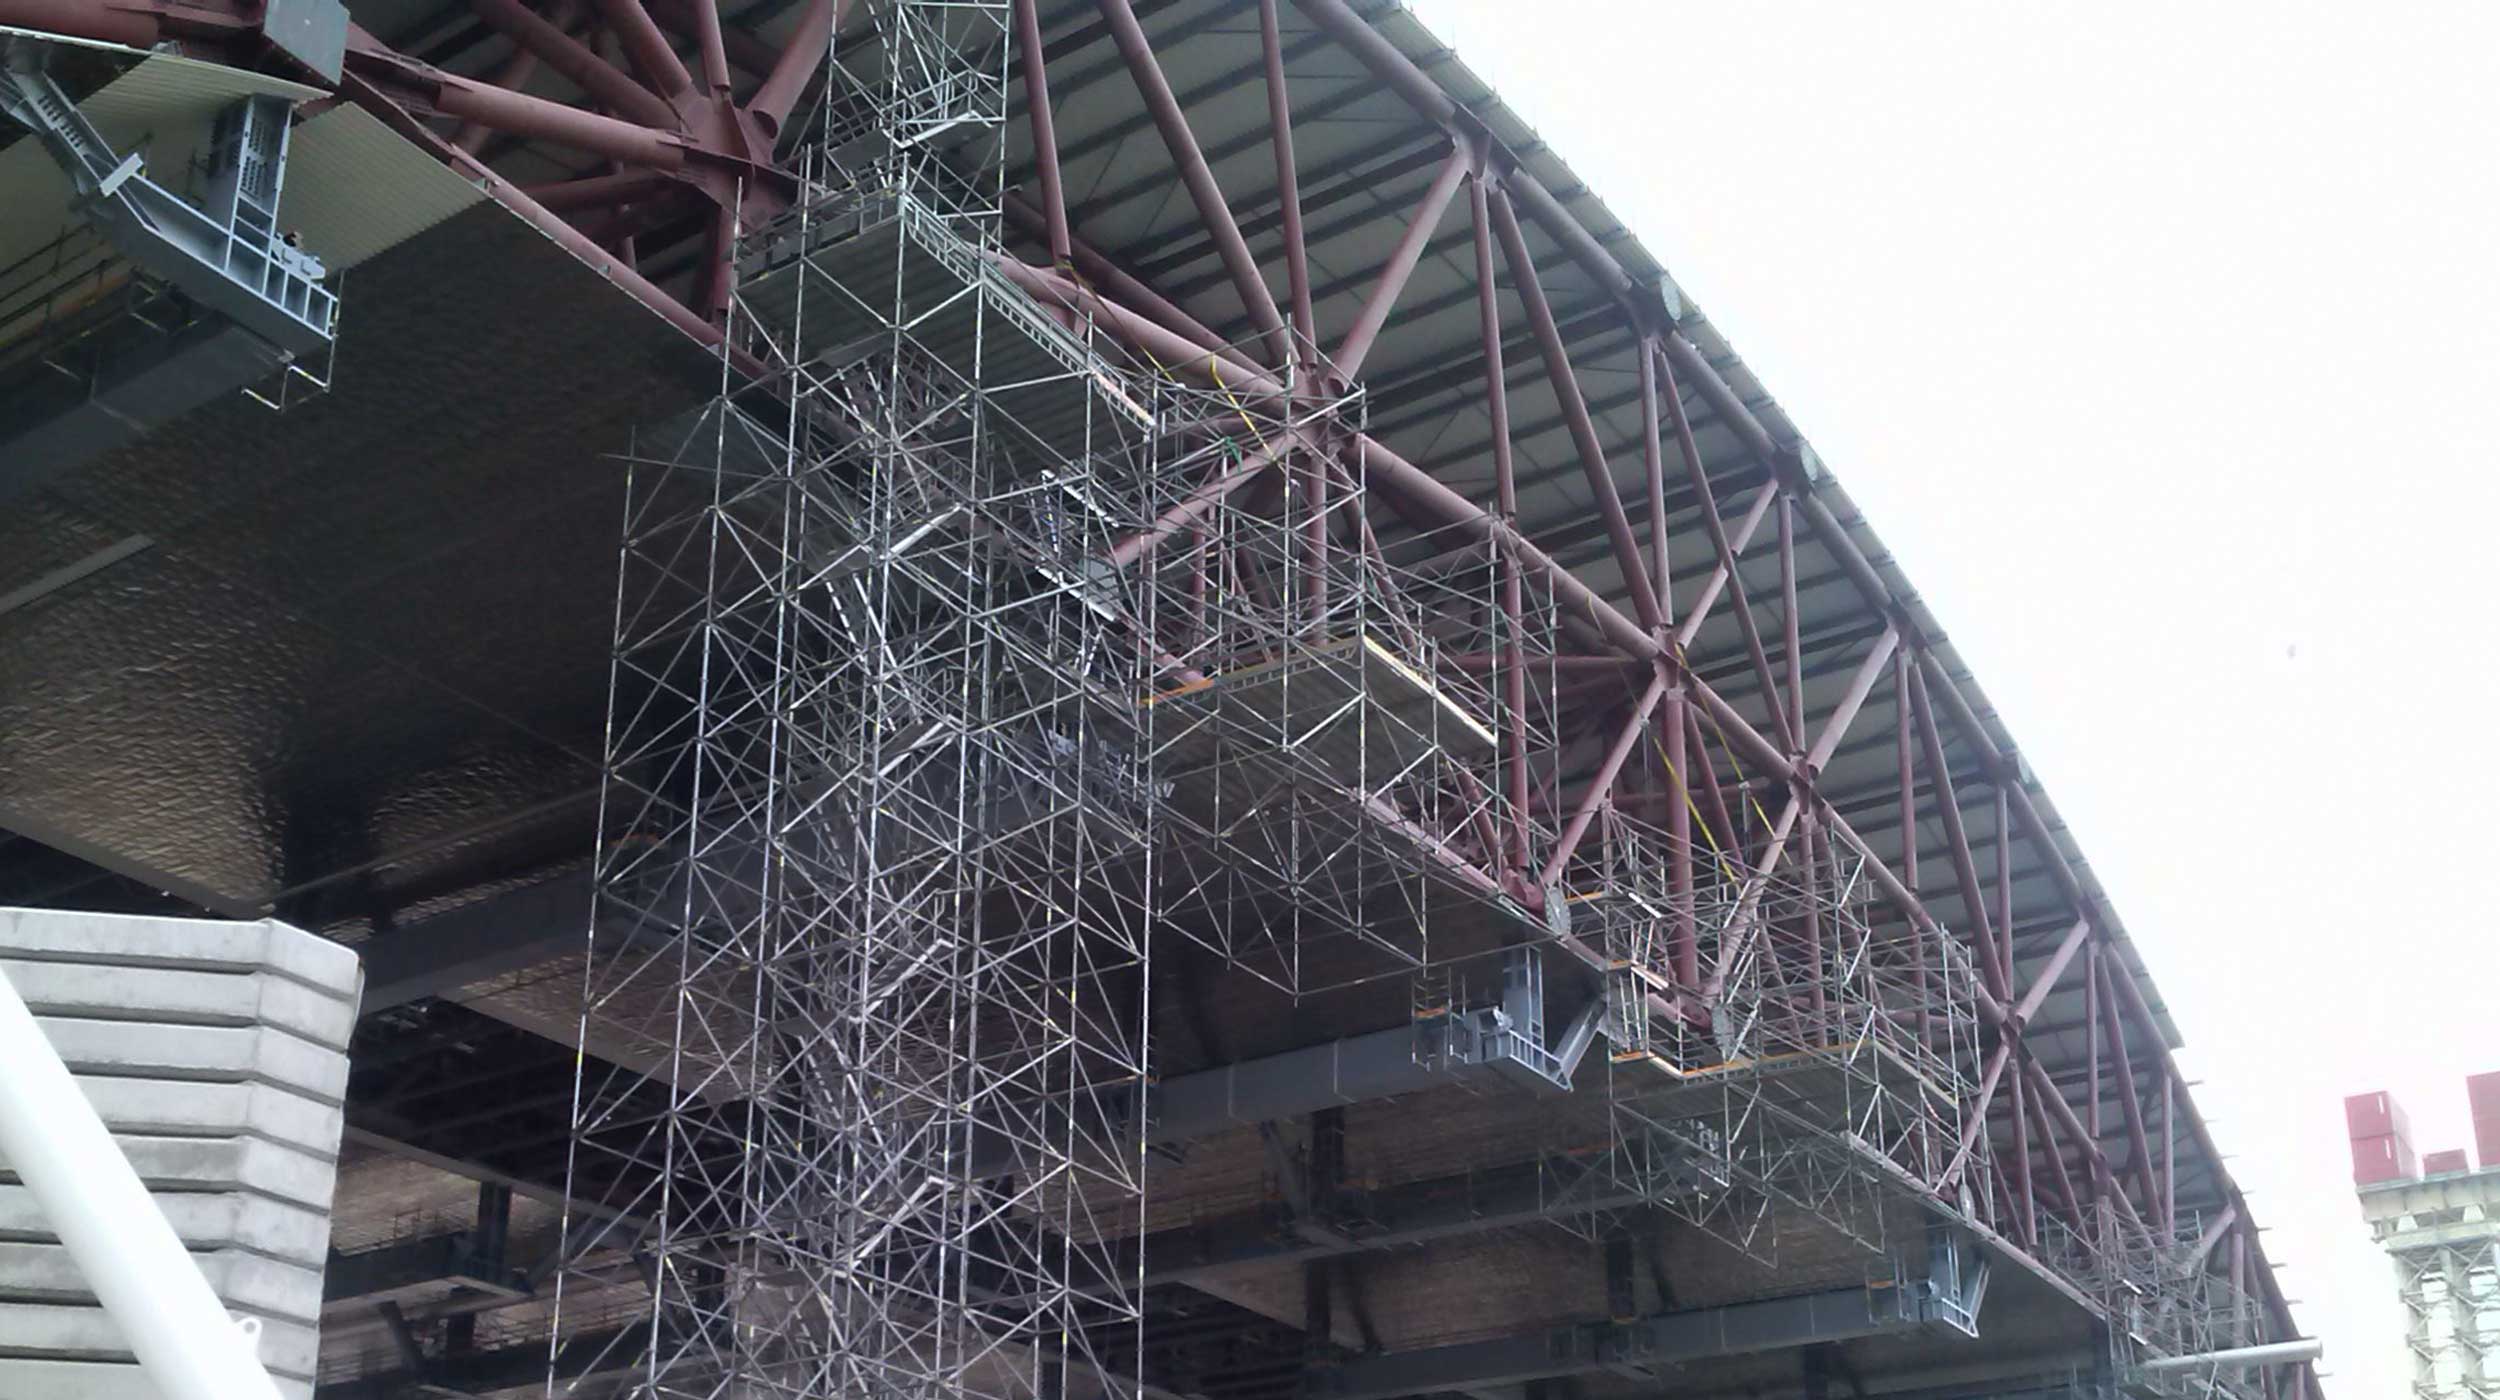 Work on a project of such international significance is an enormous responsibility, but also extremely motivating. The flexibility of the BRIO scaffolding system proved ideal for the task.